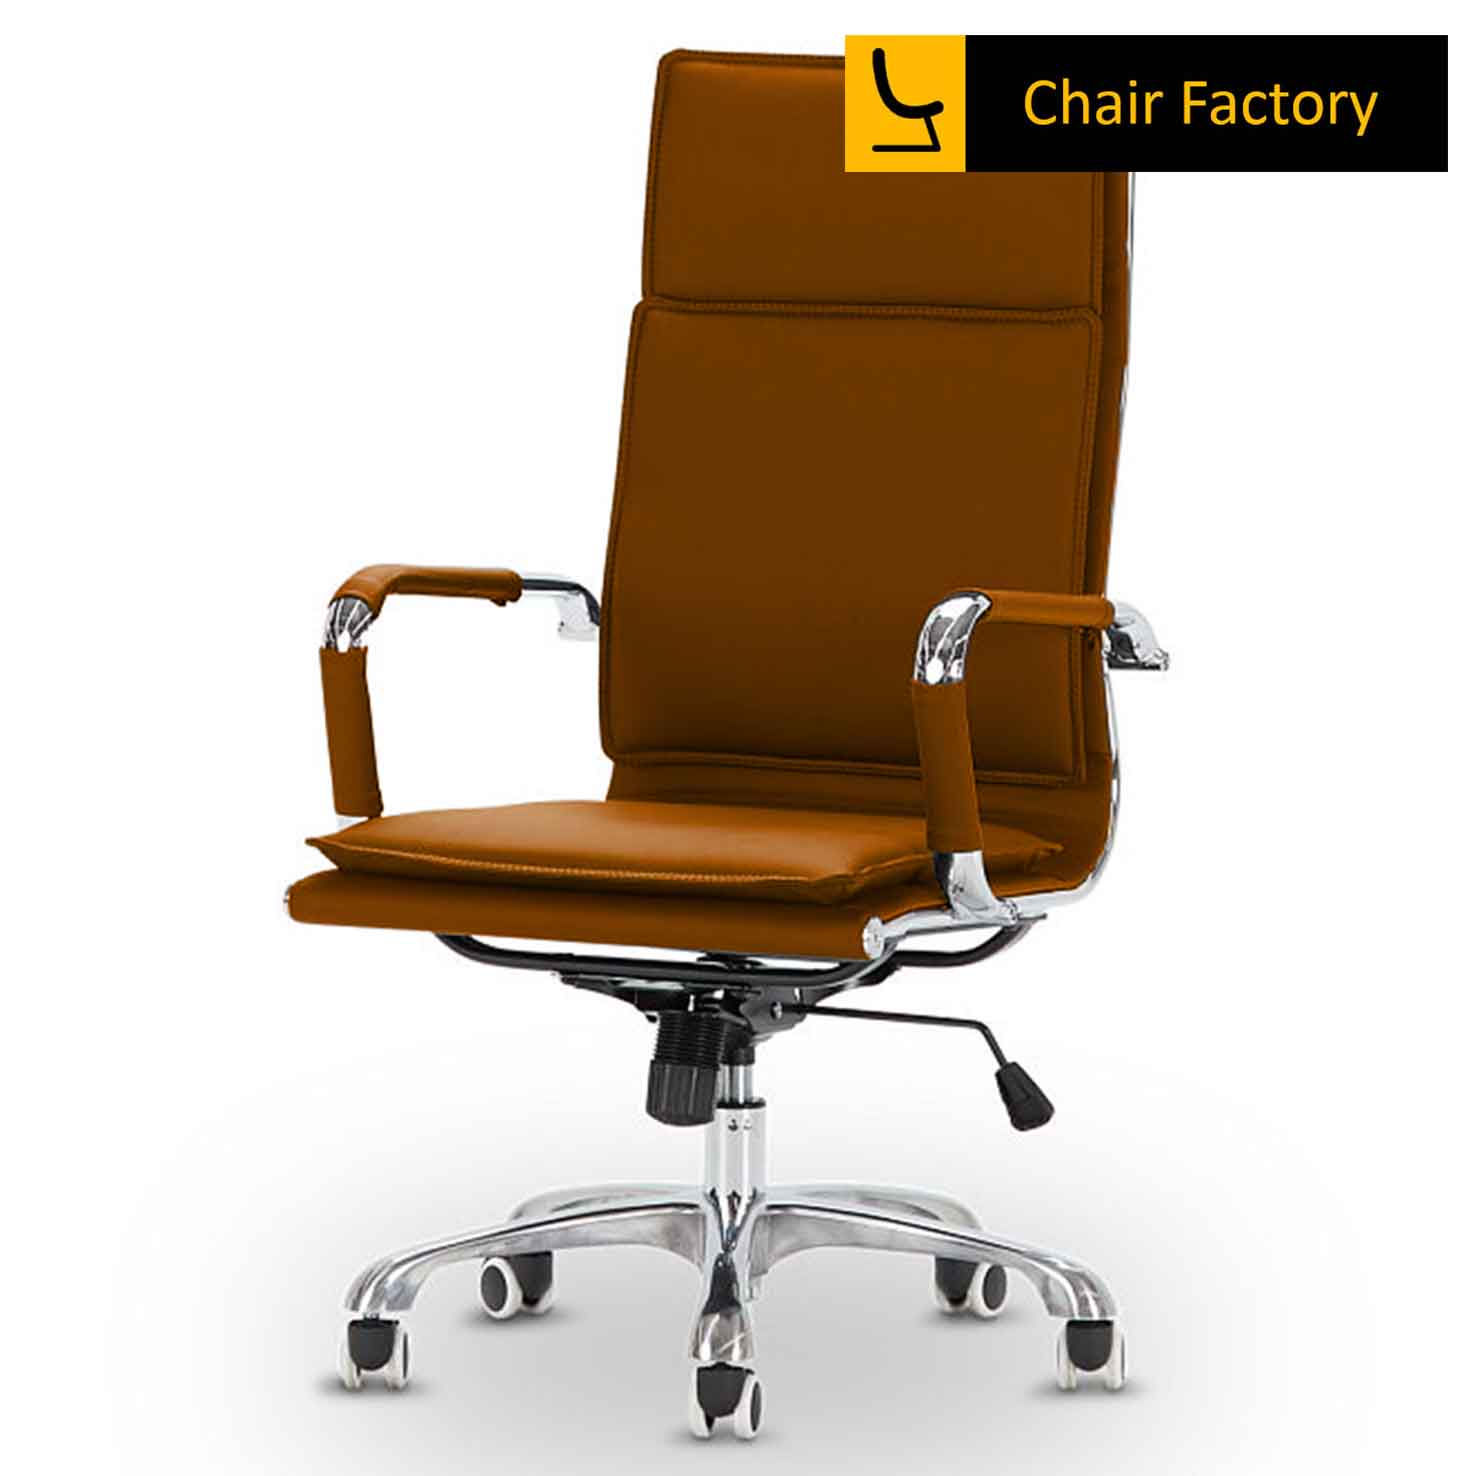 James Double Cushion Tan High Back Conference room Chair 